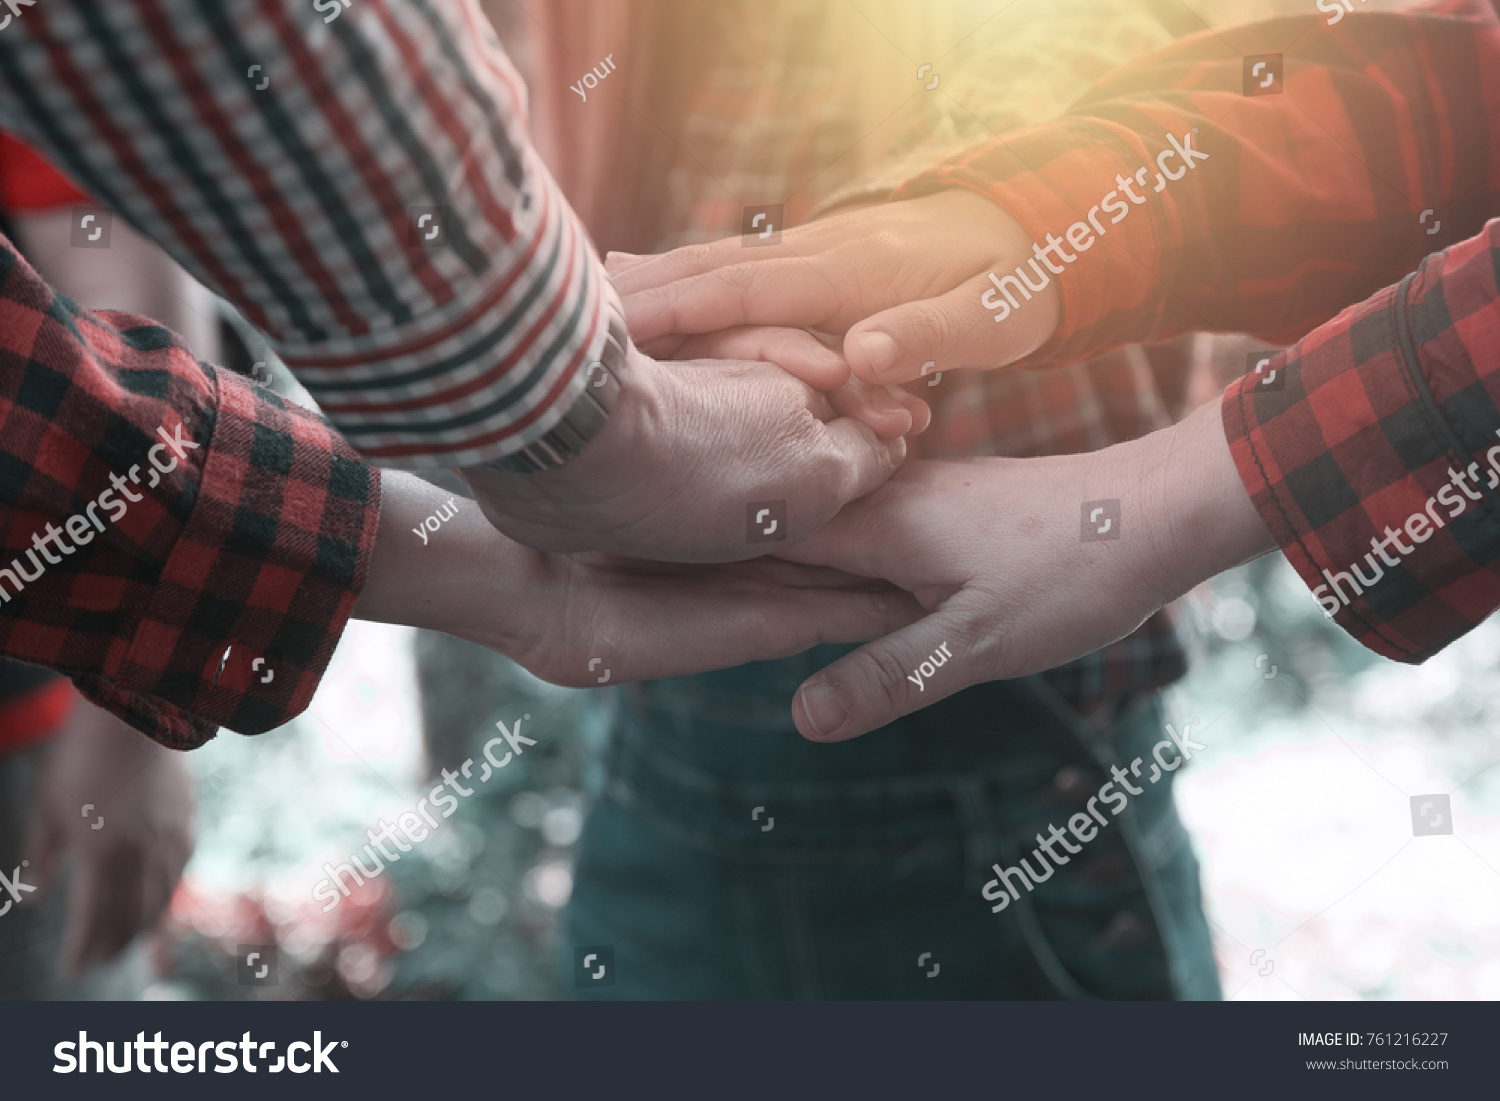 Group of farmer holding together as different  people putting their hands connected linked together and community trust and faith metaphor showing unity.Teamwork concept. #761216227